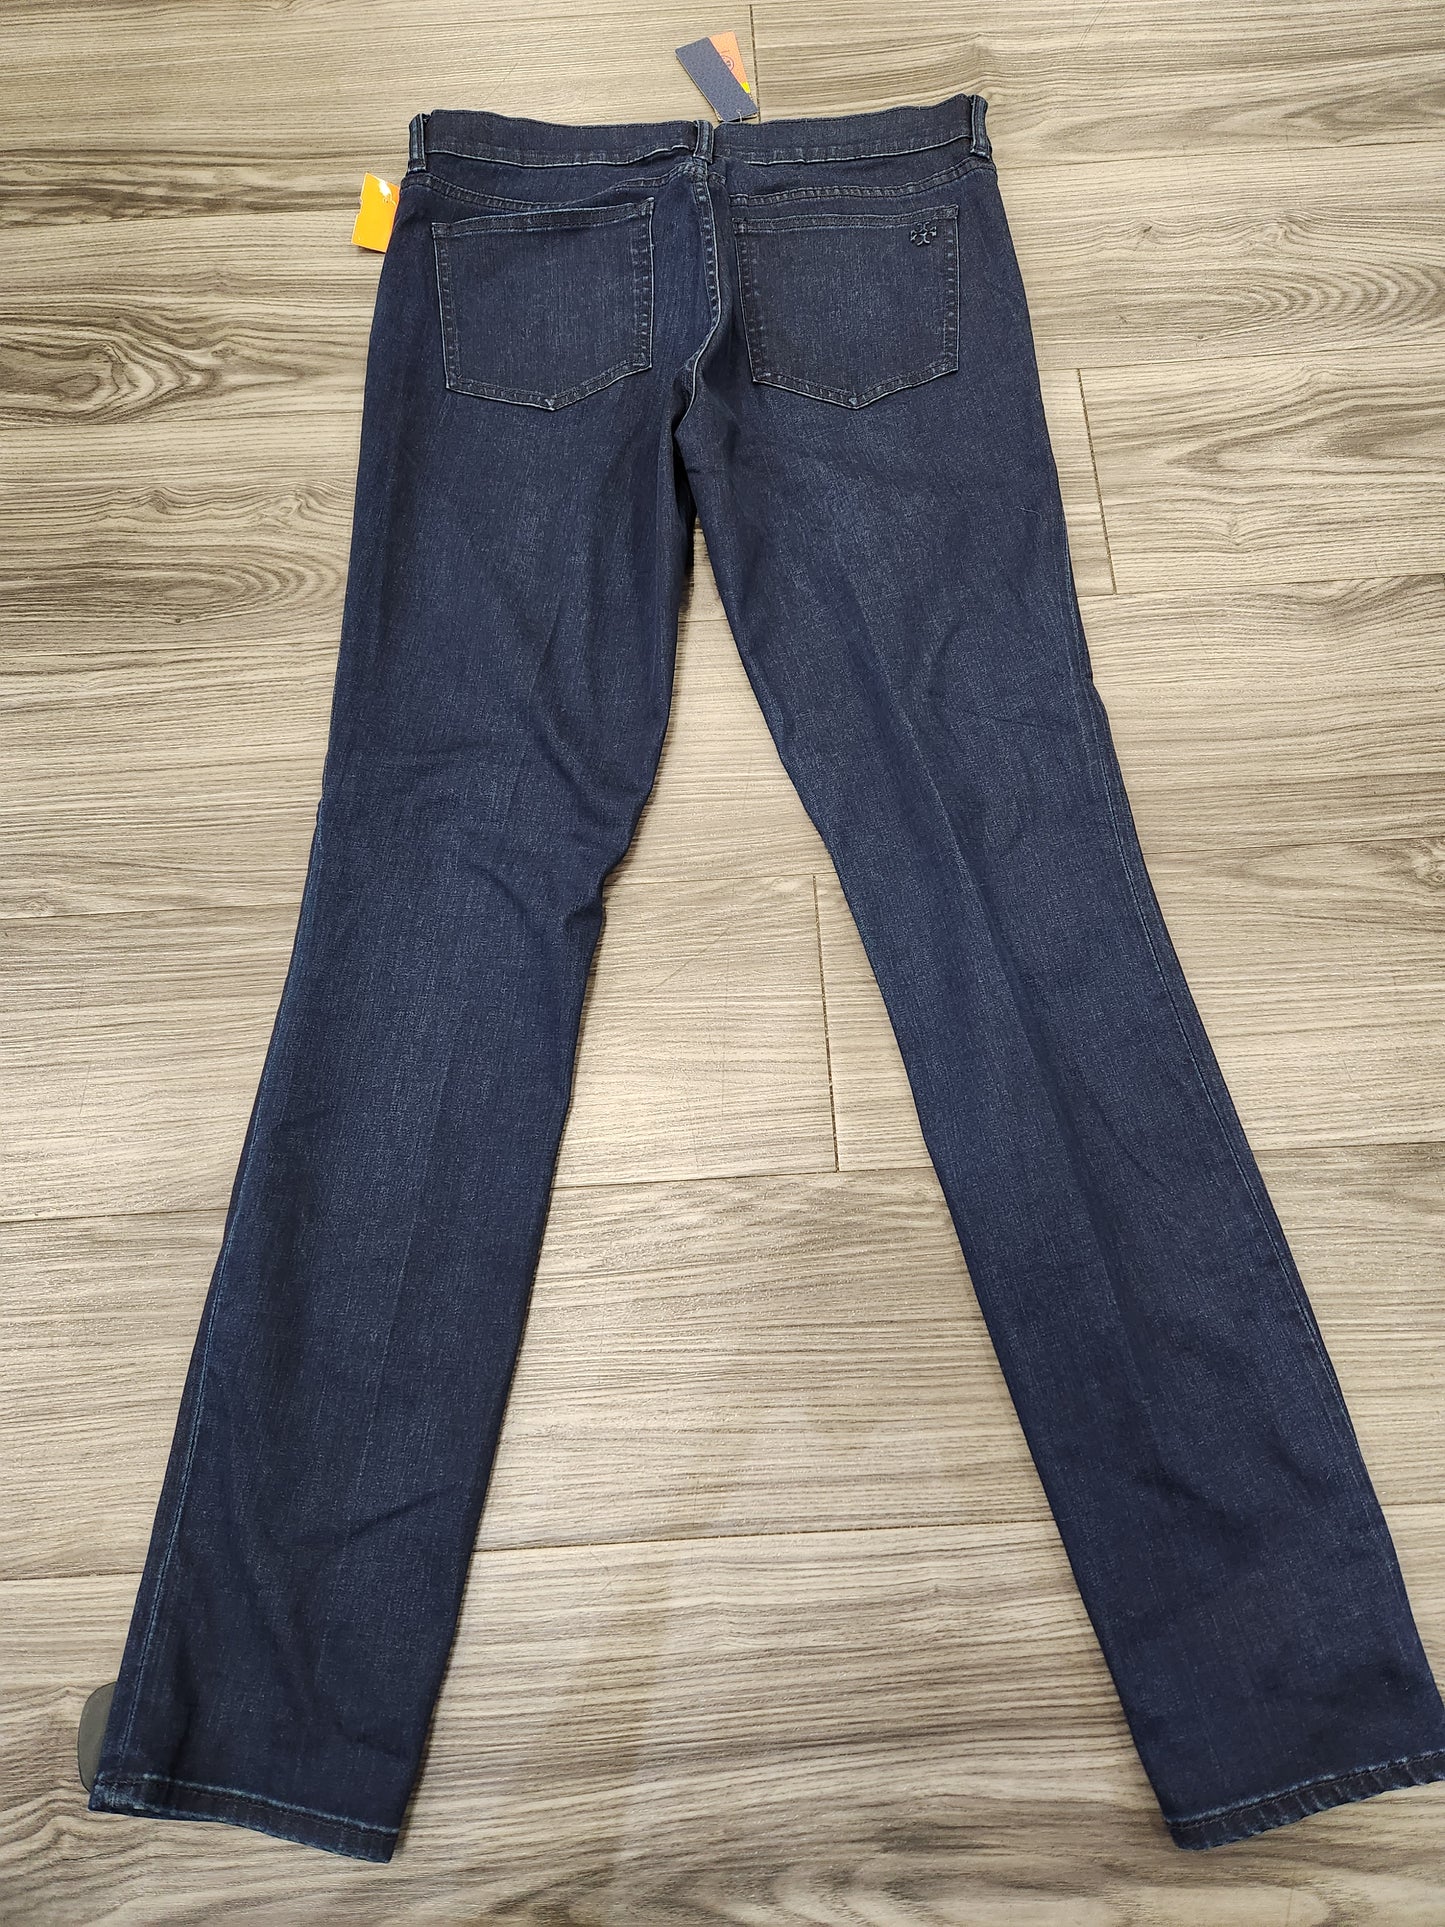 Jeans Jeggings By Tory Burch  Size: 12